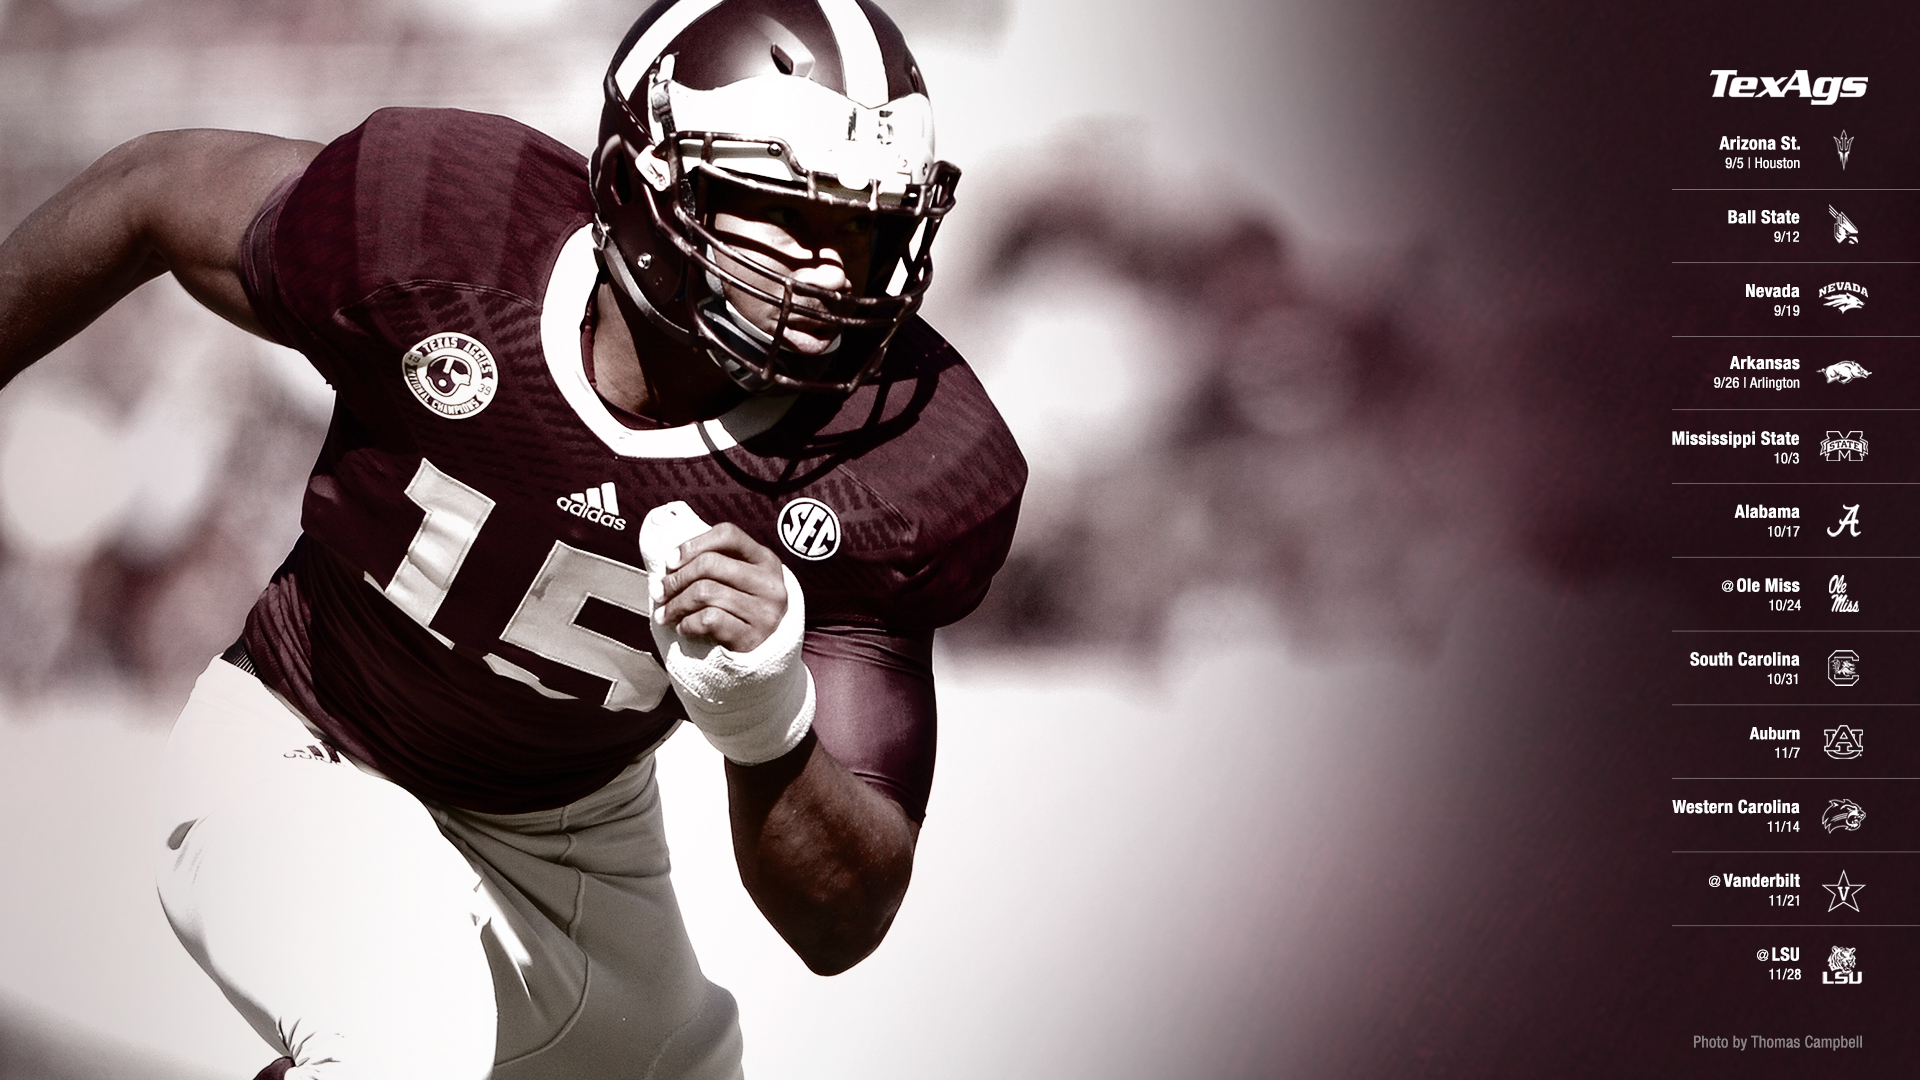 2015 Aggie Football Wallpapers | TexAgs